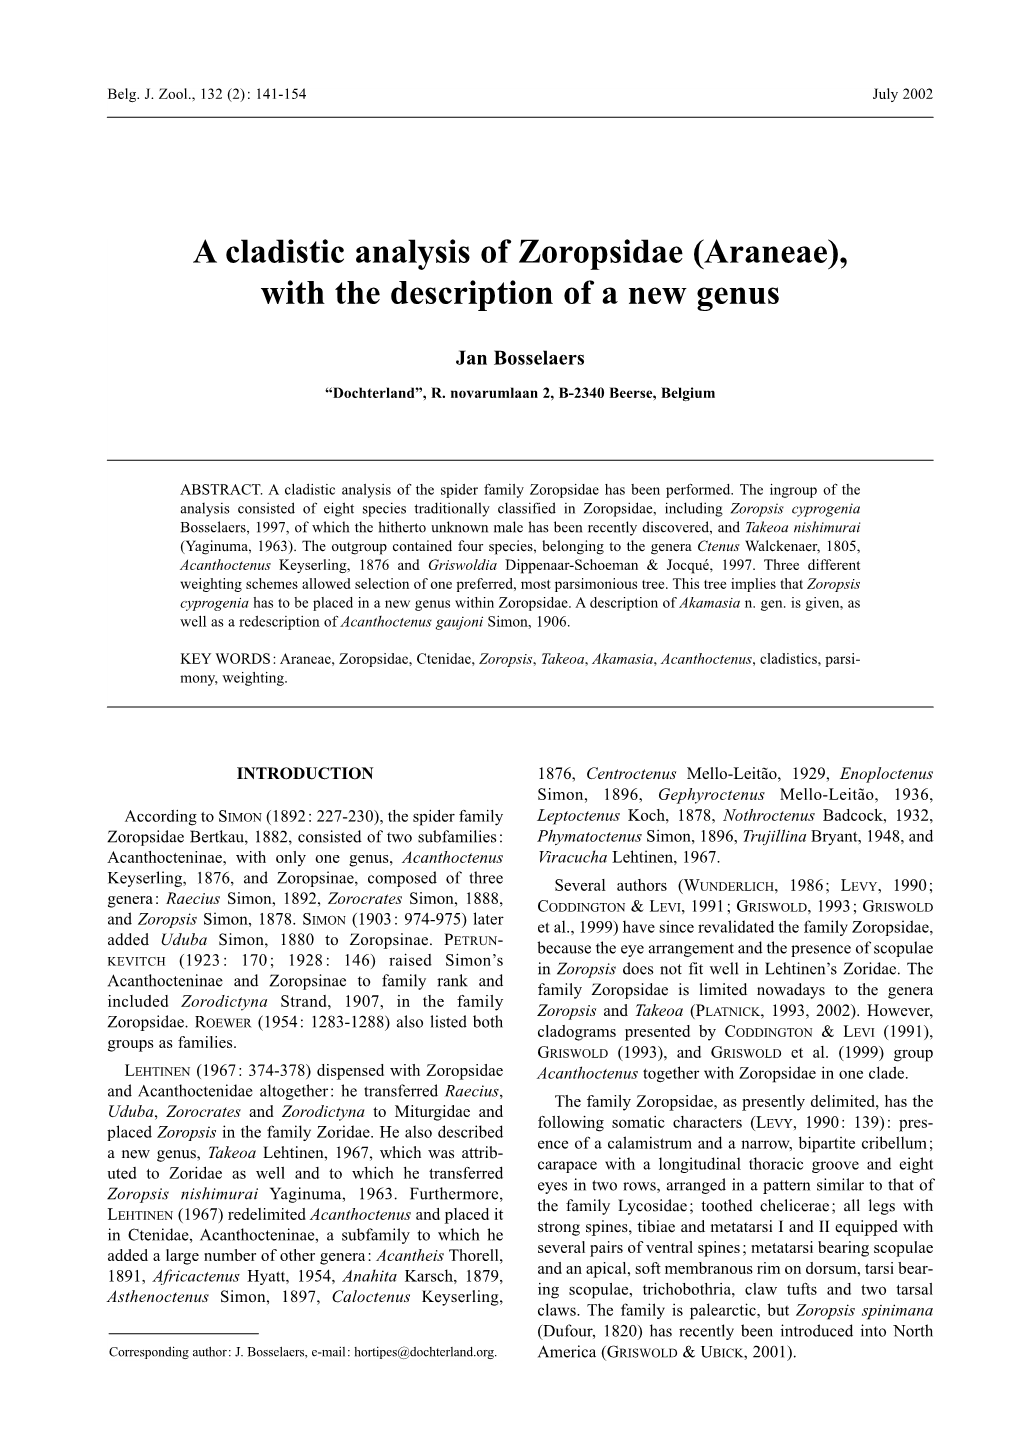 A Cladistic Analysis of Zoropsidae (Araneae), with the Description of a New Genus